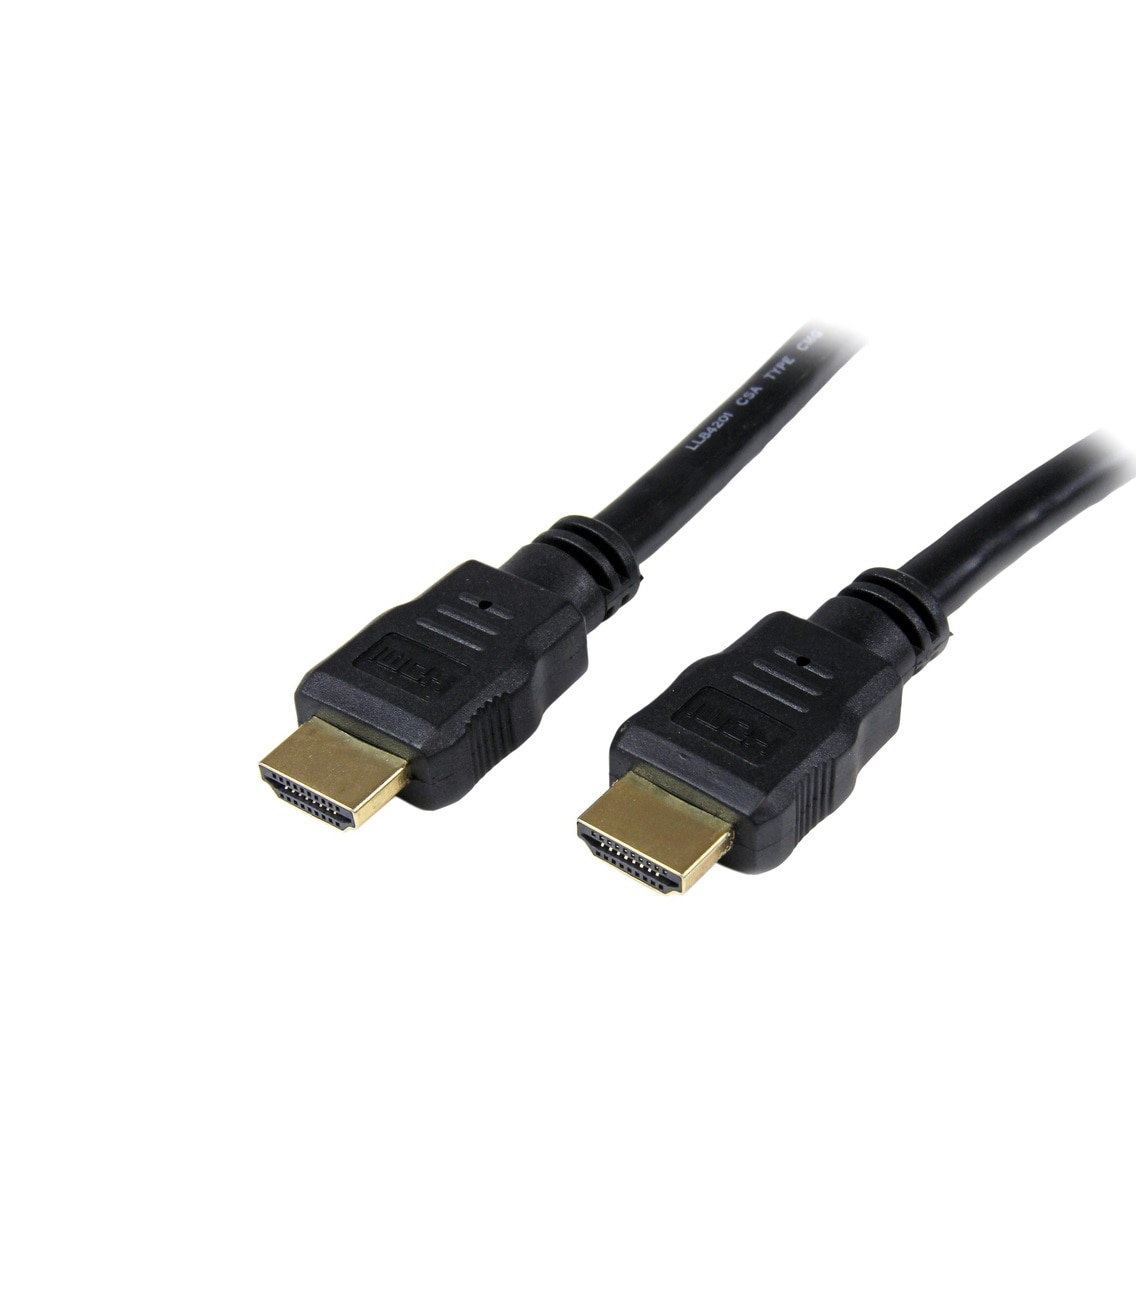 Startech 10' High Speed HDMI Cable